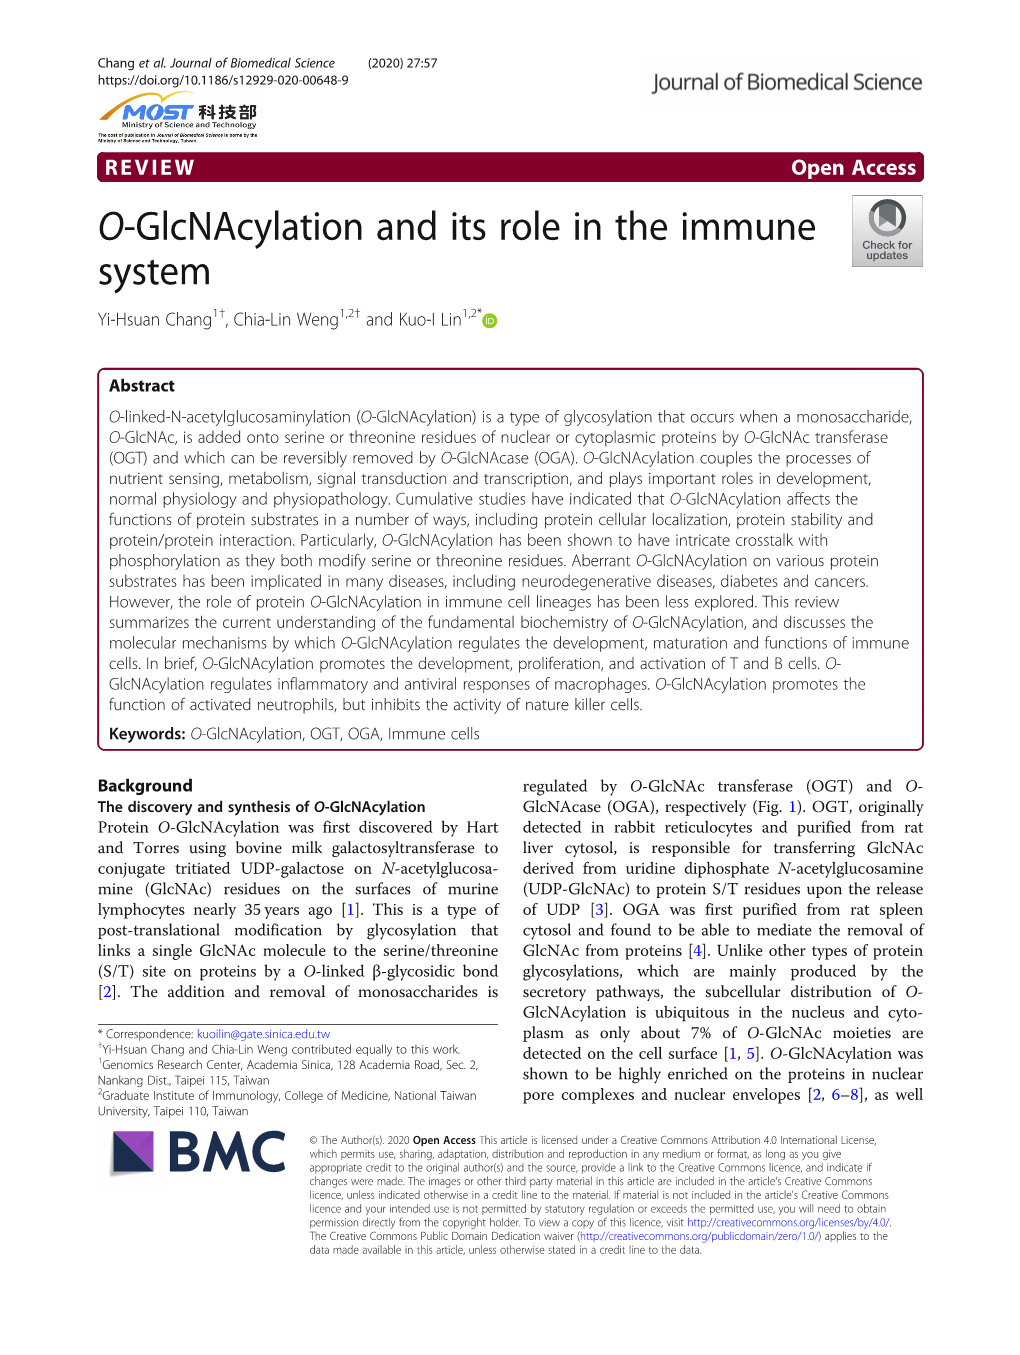 O-Glcnacylation and Its Role in the Immune System Yi-Hsuan Chang1†, Chia-Lin Weng1,2† and Kuo-I Lin1,2*